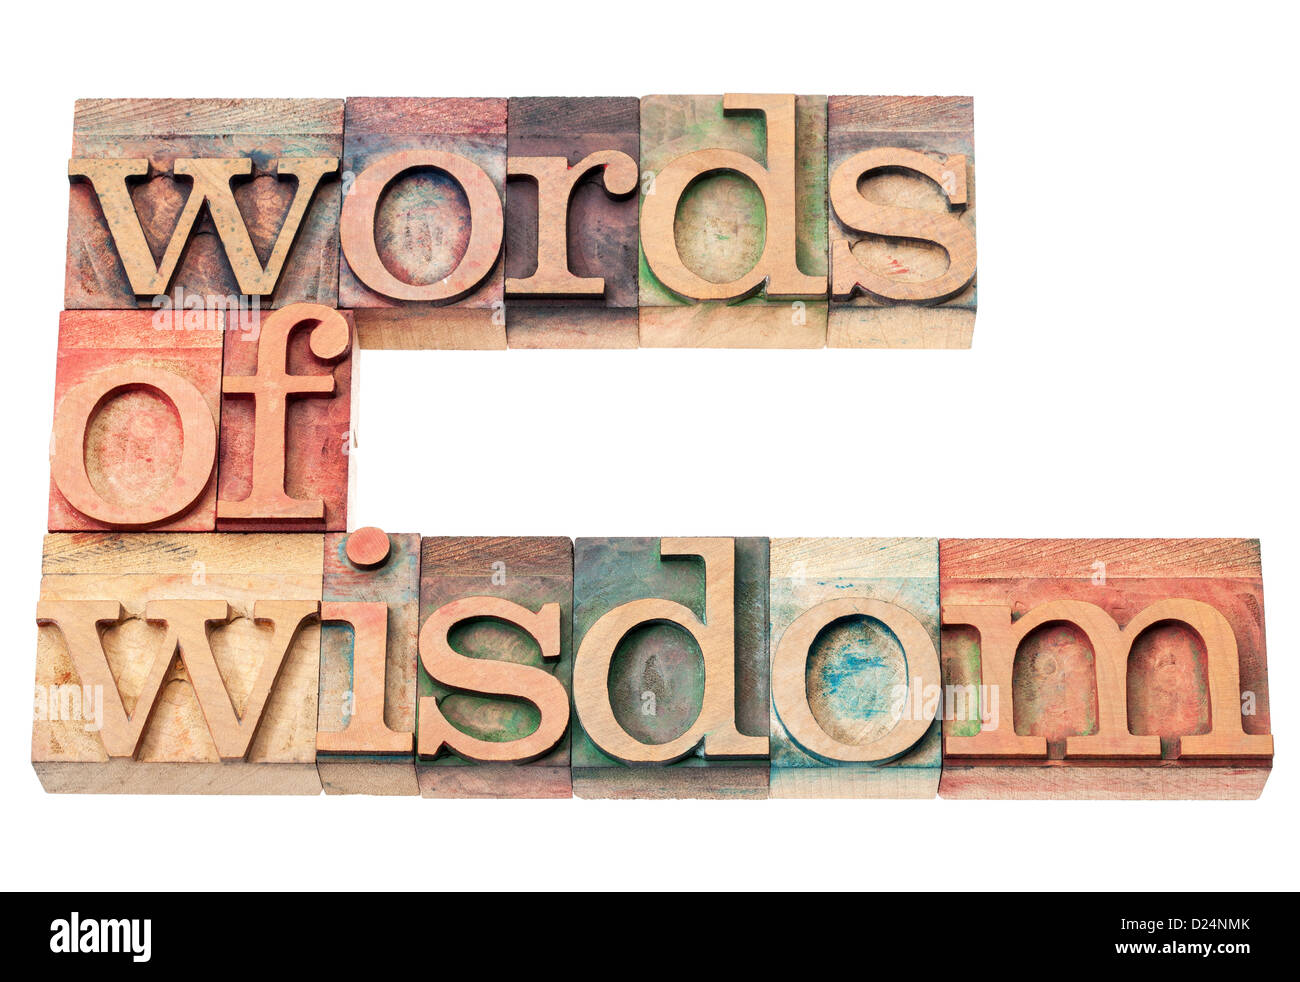 words of wisdom - isolated text in vintage letterpress wood type printing blocks Stock Photo